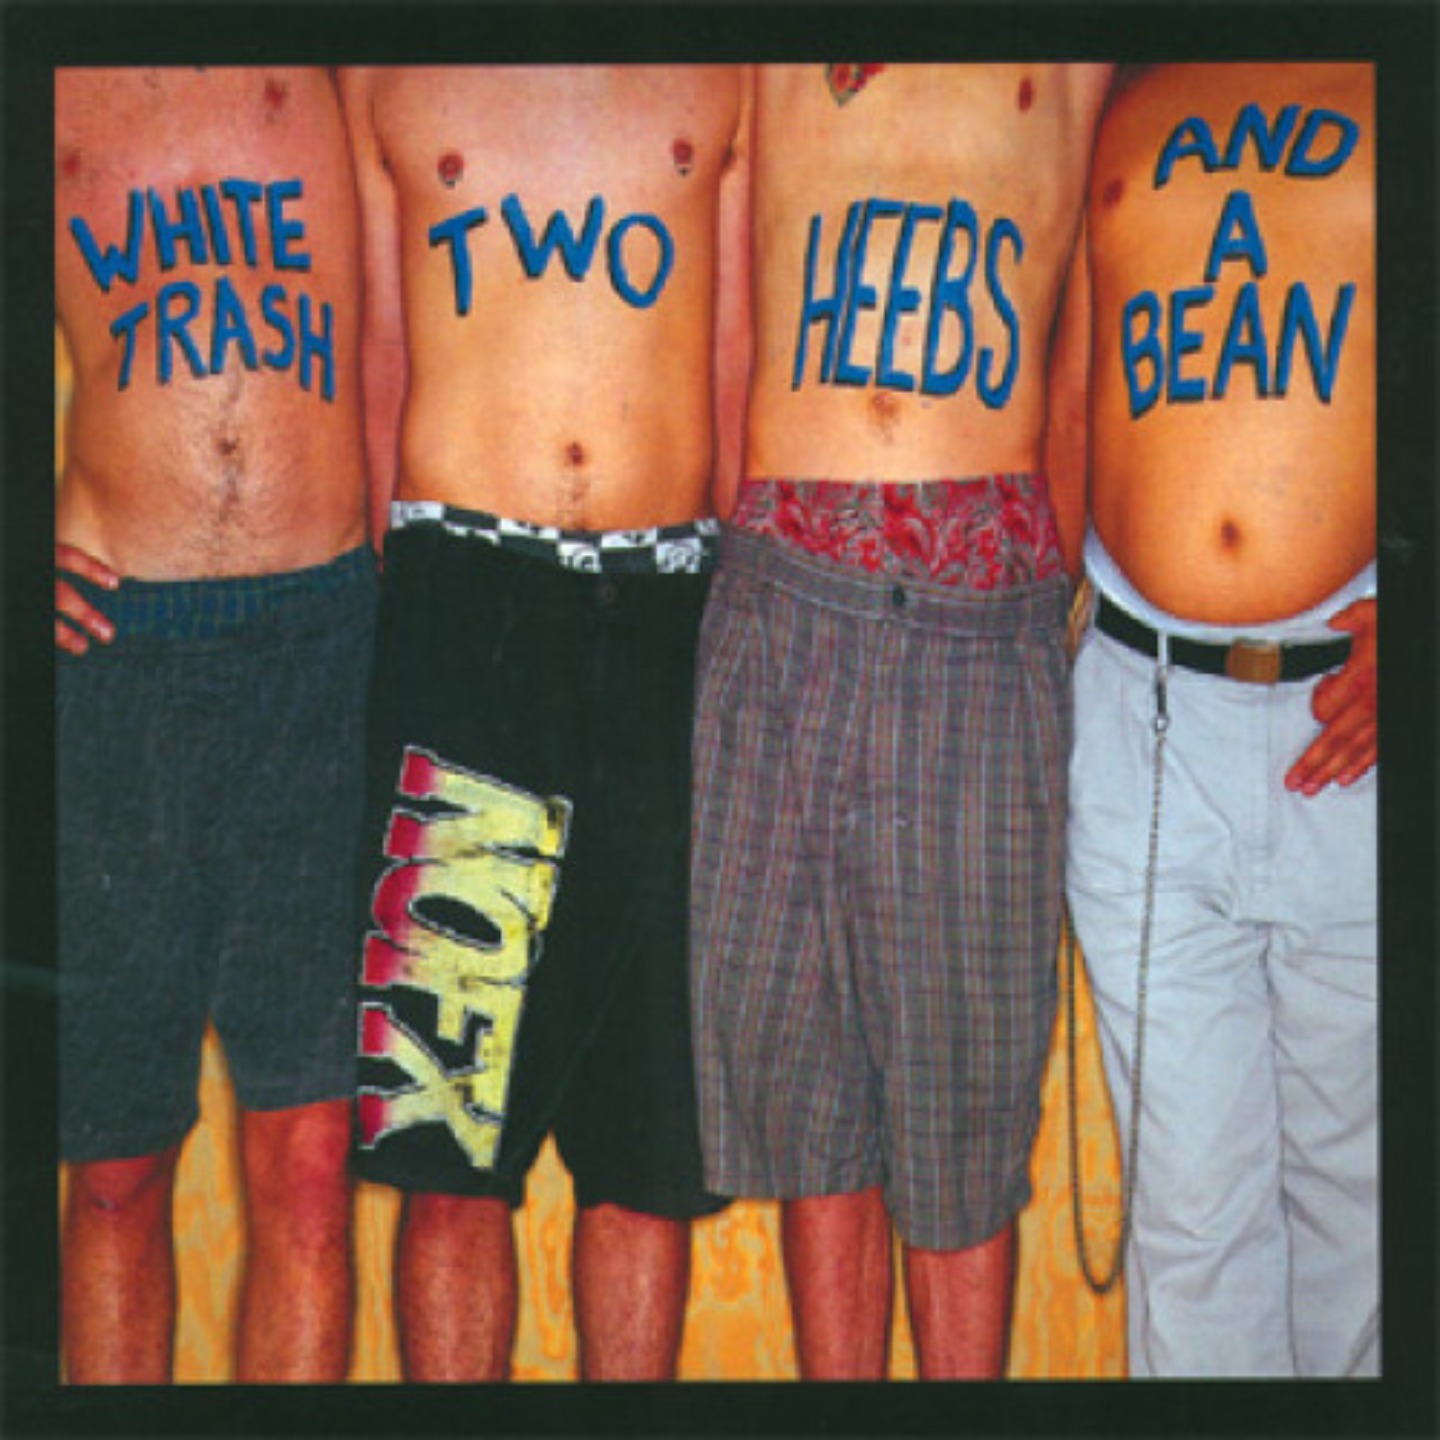 NOFX - White Trash Two Heebs And A Bean LP